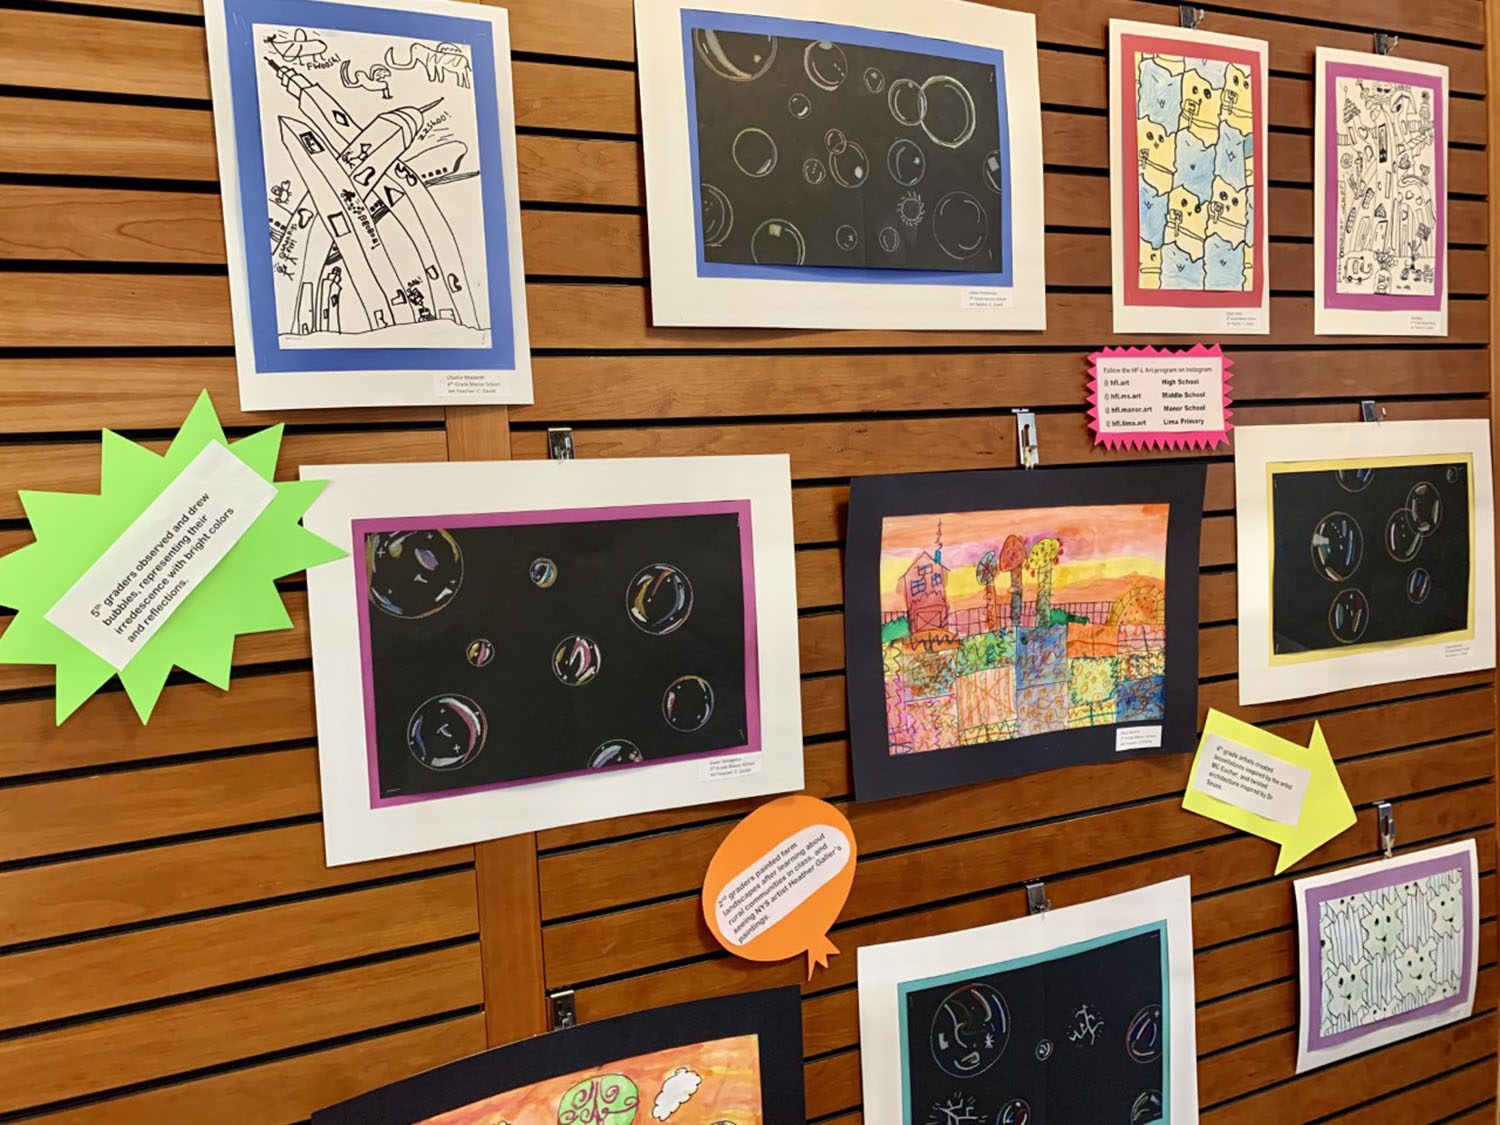 Manor School and Middle School Artwork on Display at Mendon Public Library